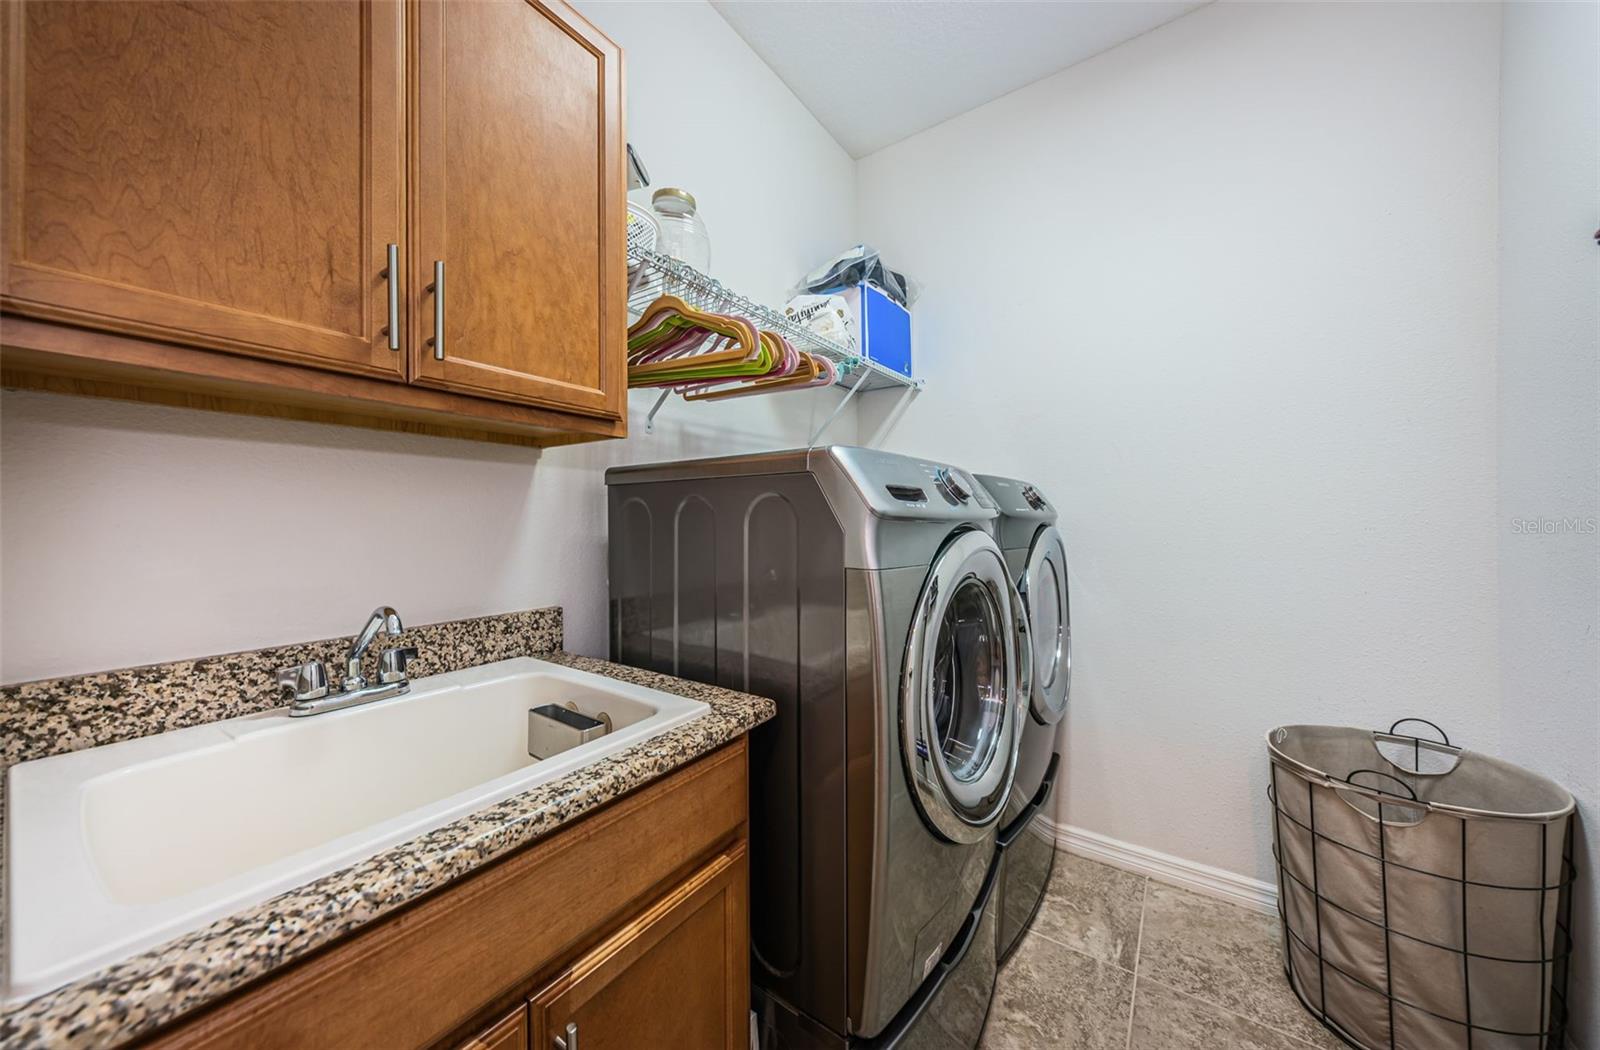 Utility Room with full sized washer and dryer